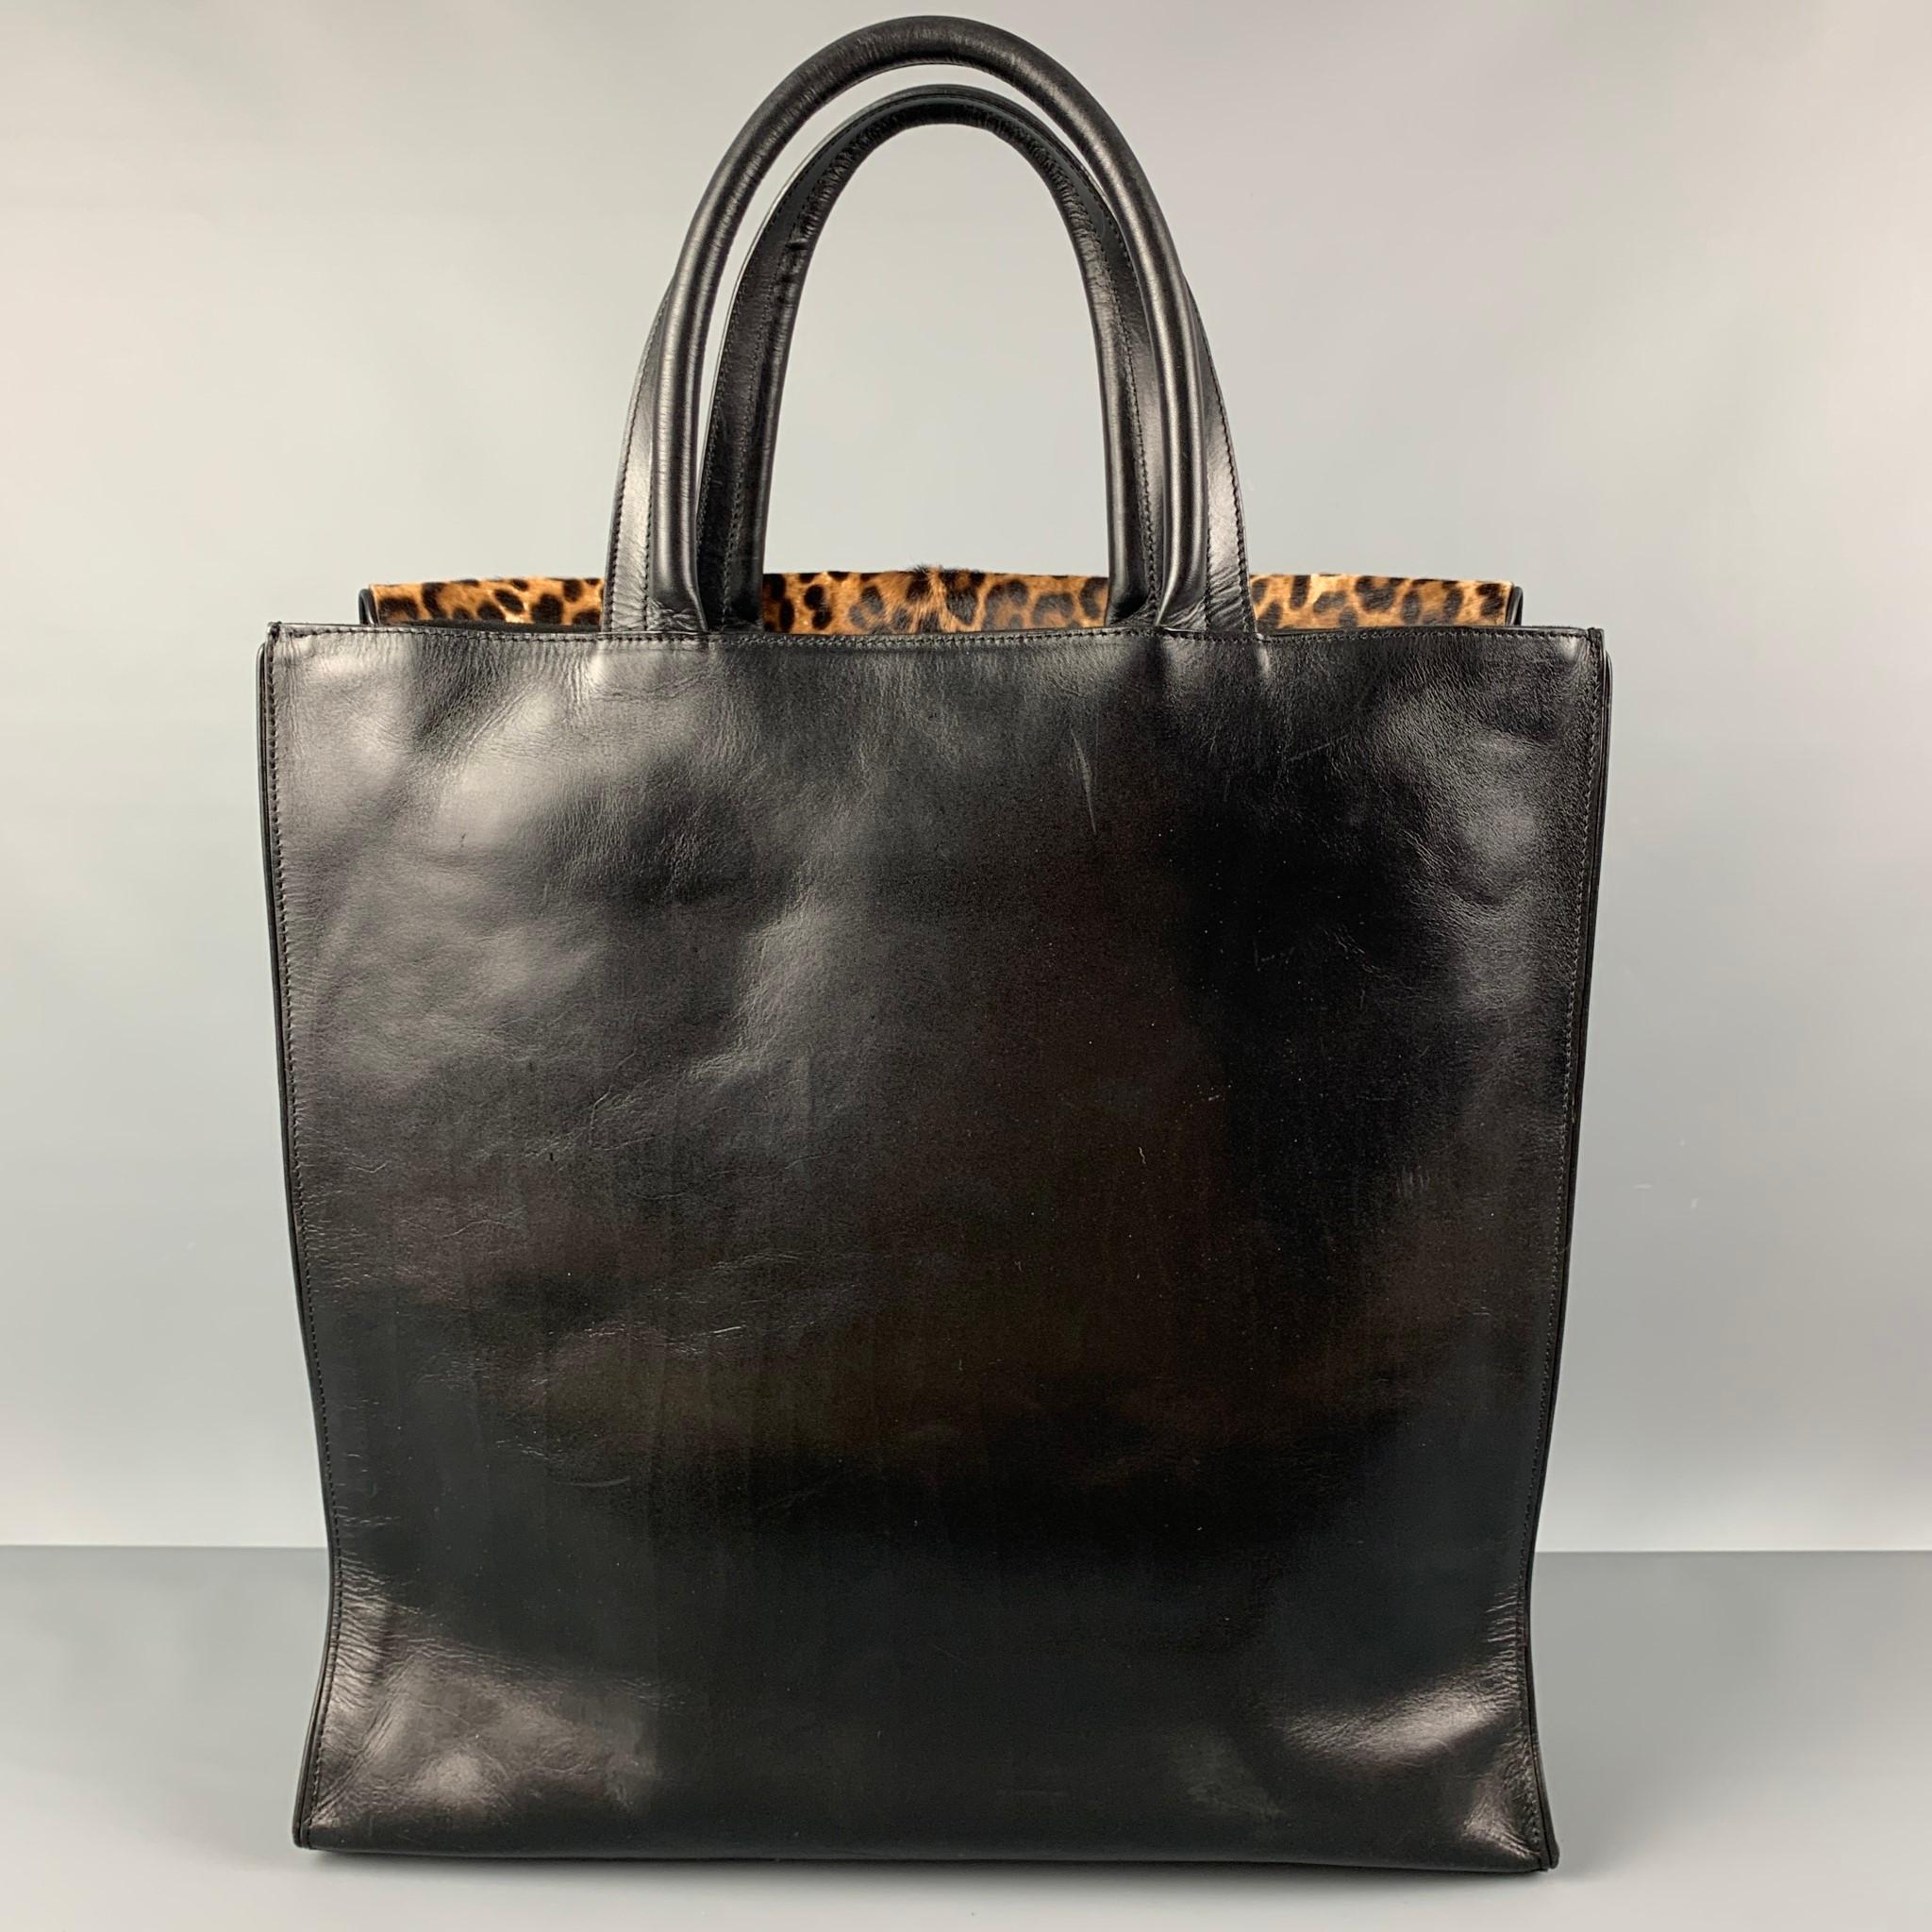 DRIES VAN NOTEN bag comes in a brown & beige animal print ponyhair and a black leather panel featuring top handles, front flap pocket, and interior double zip pockets. Includes dust bag.

Very Good Pre-Owned Condition.

Measurements:

Length: 15